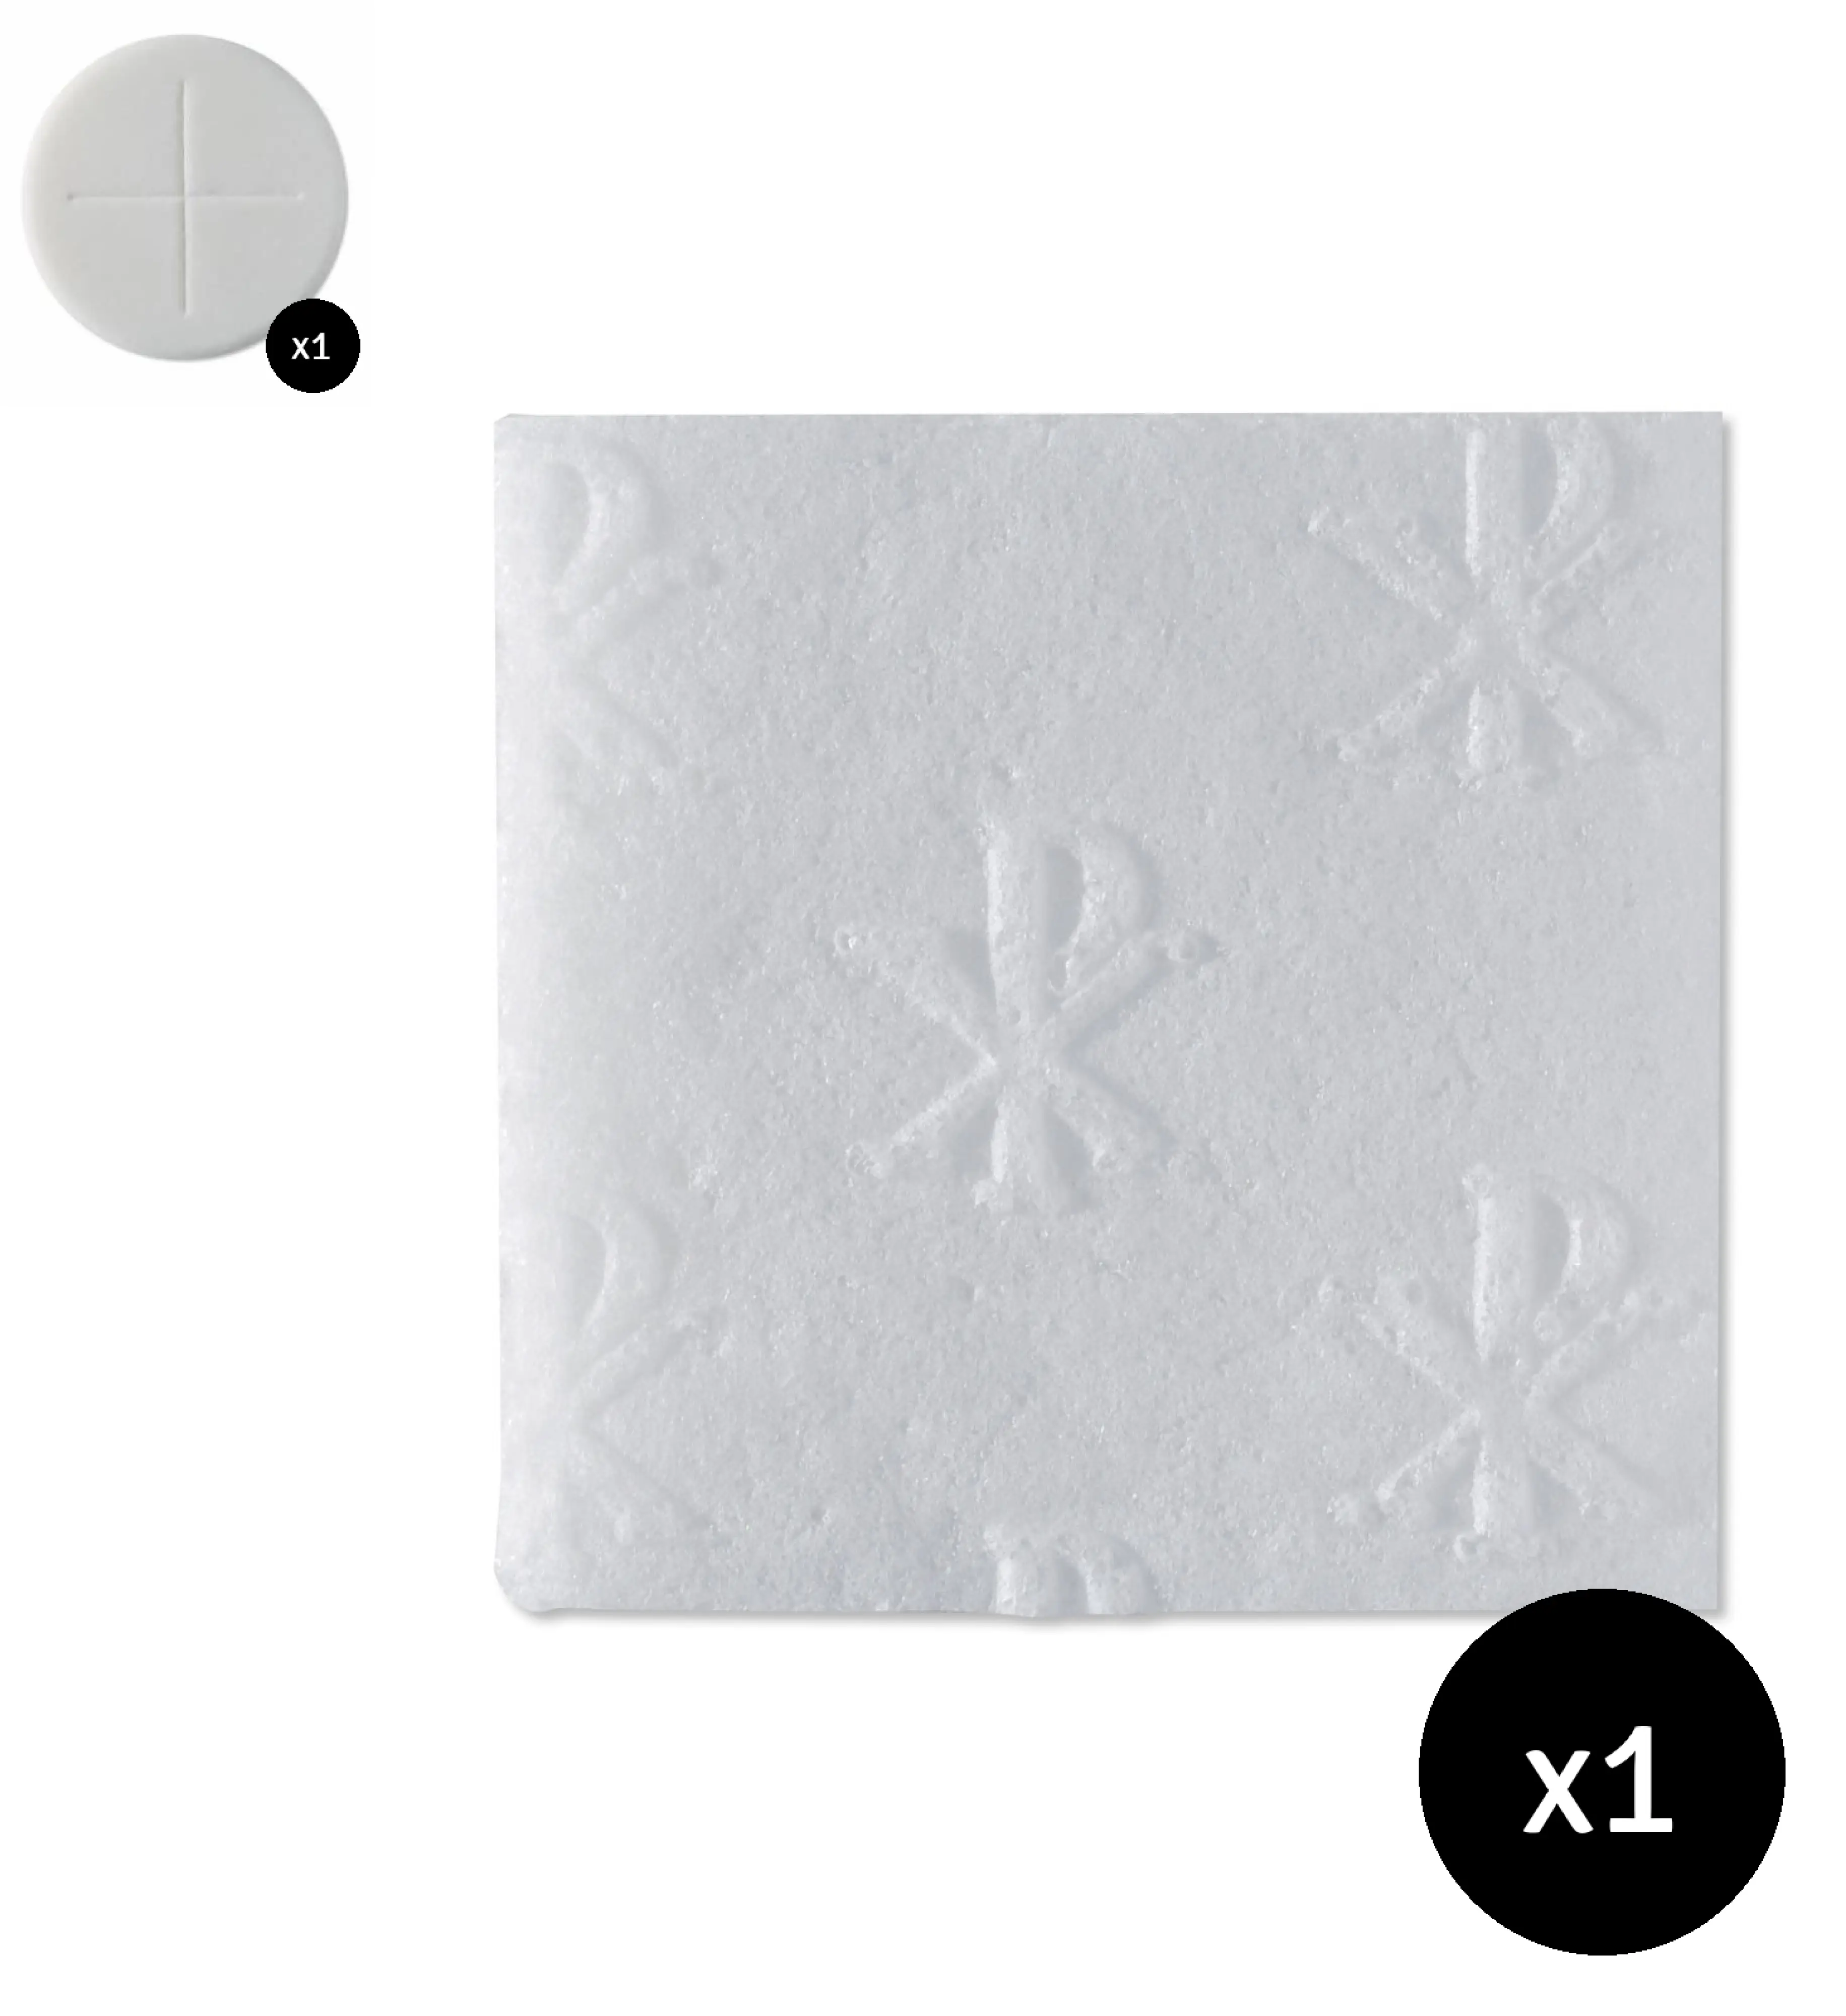 Pack of 50 - 2.75" Priests Altar Bread - White Cross & Pack of 50 Gluten Free 1" x 1" Peoples Square Wafers